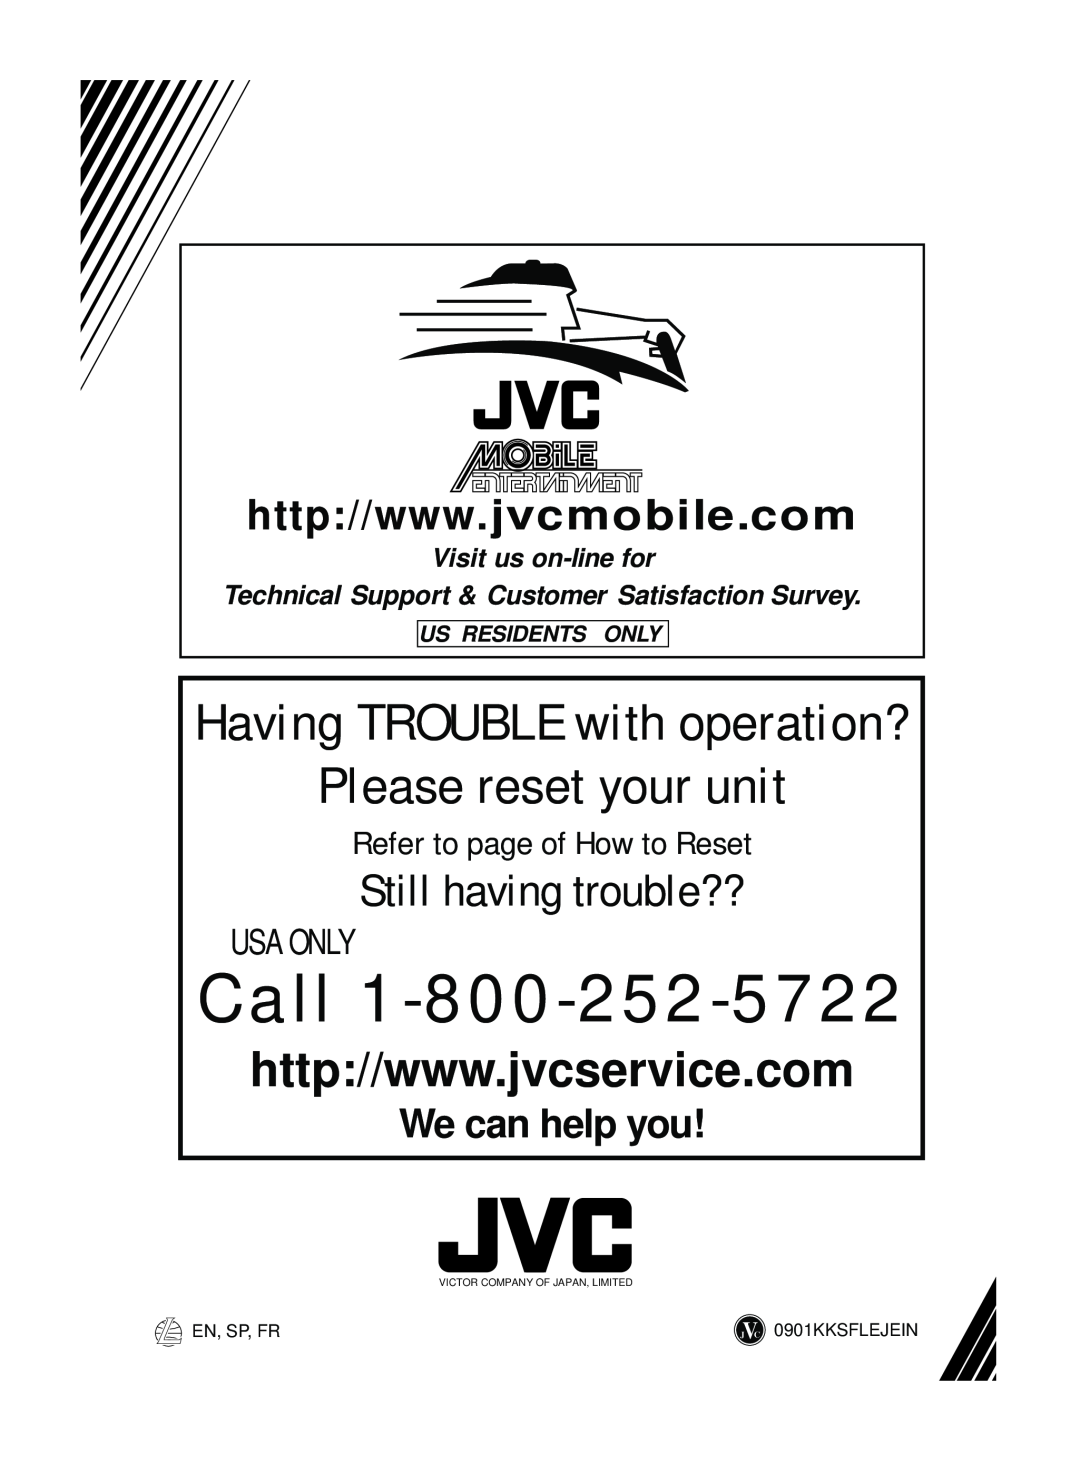 JVC KS-F160 We can help you, Us Residents Only, Call, Please reset your unit, Having TROUBLE with operation?, Usa Only 